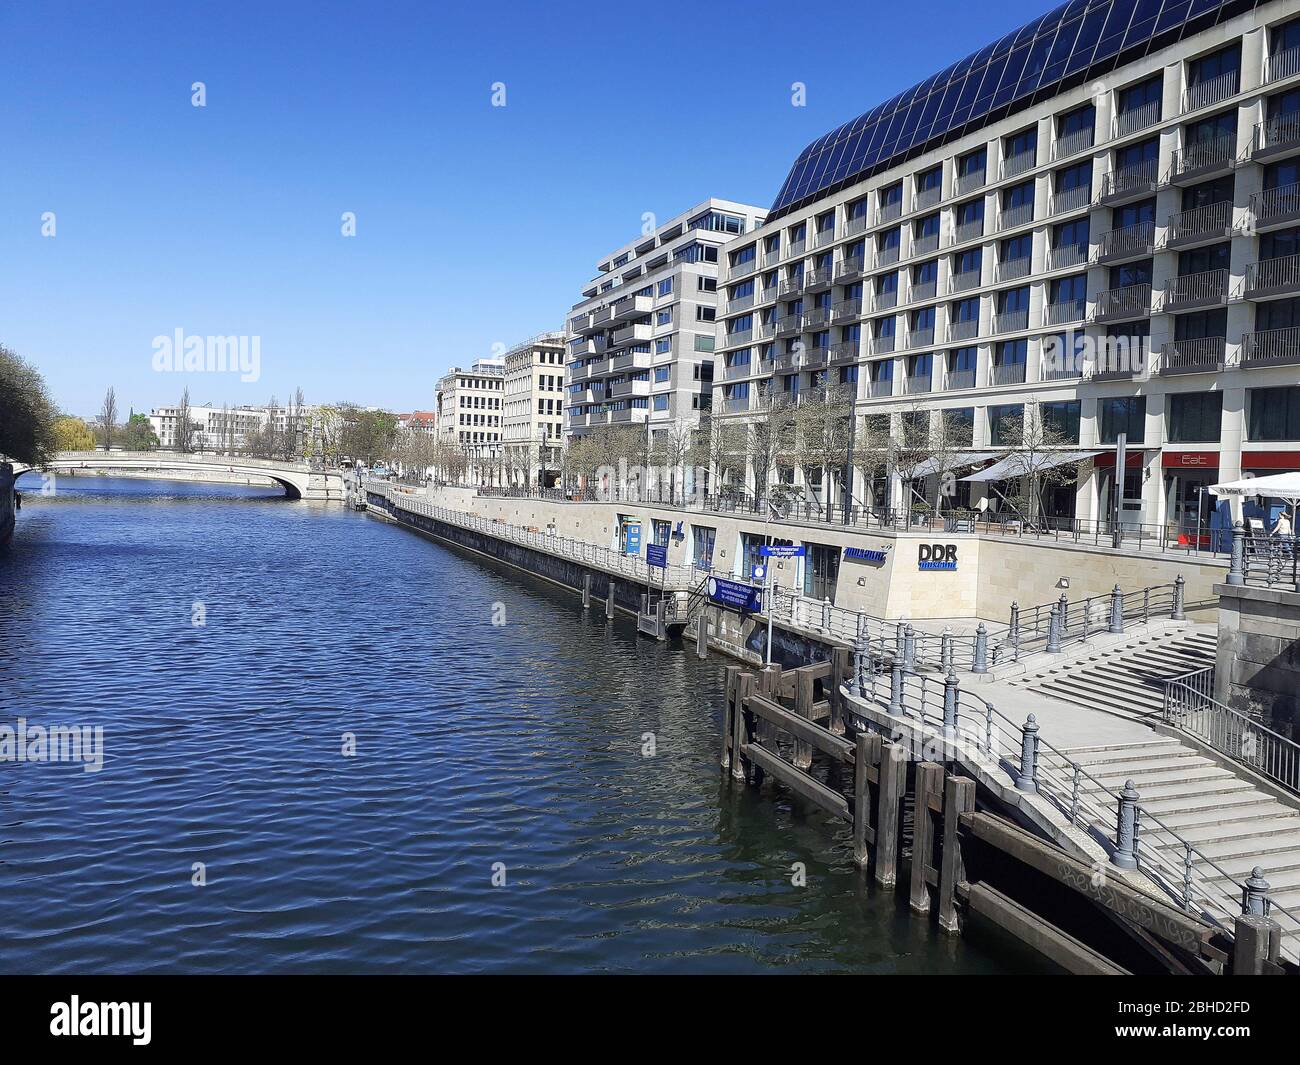 The River Spree, devoid of river traffic and tourists during the lock-down due to the Coronavirus pandemic, April 2020, Berlin, Germany Stock Photo